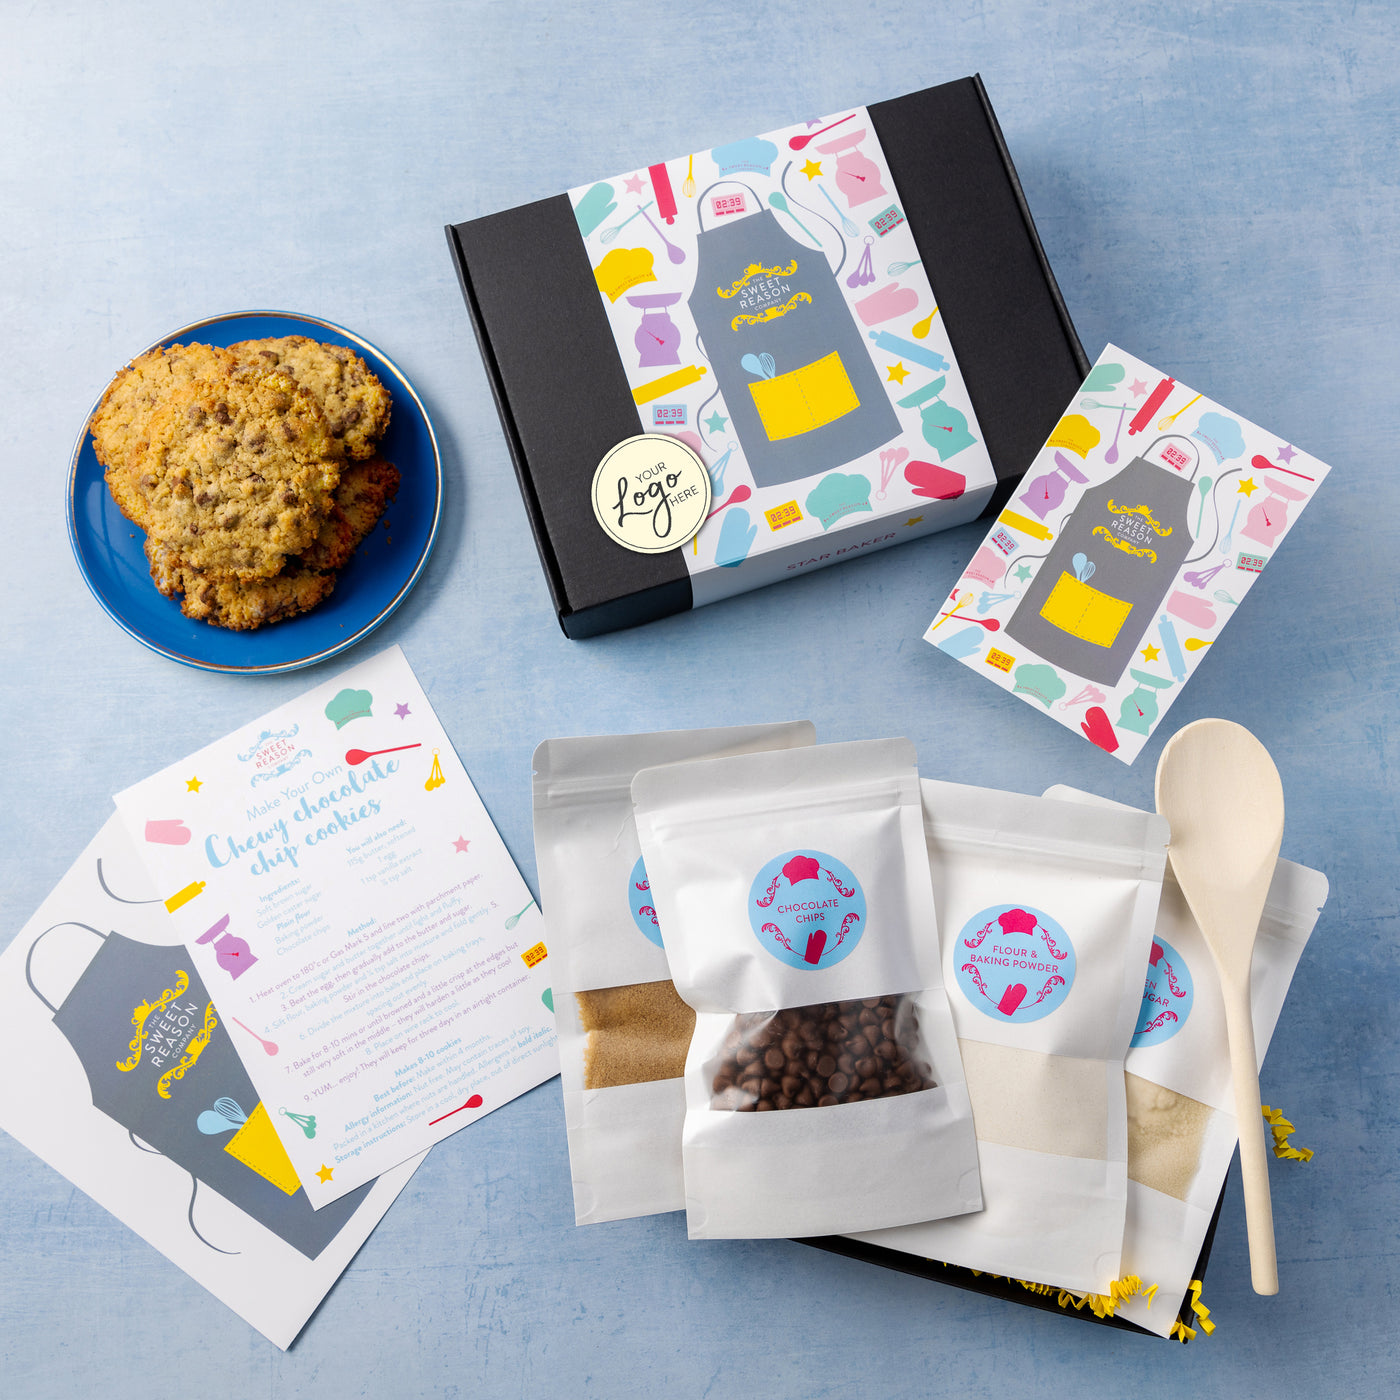 Branded & personalised Bake Your Own Cookies and Wooden Spoon